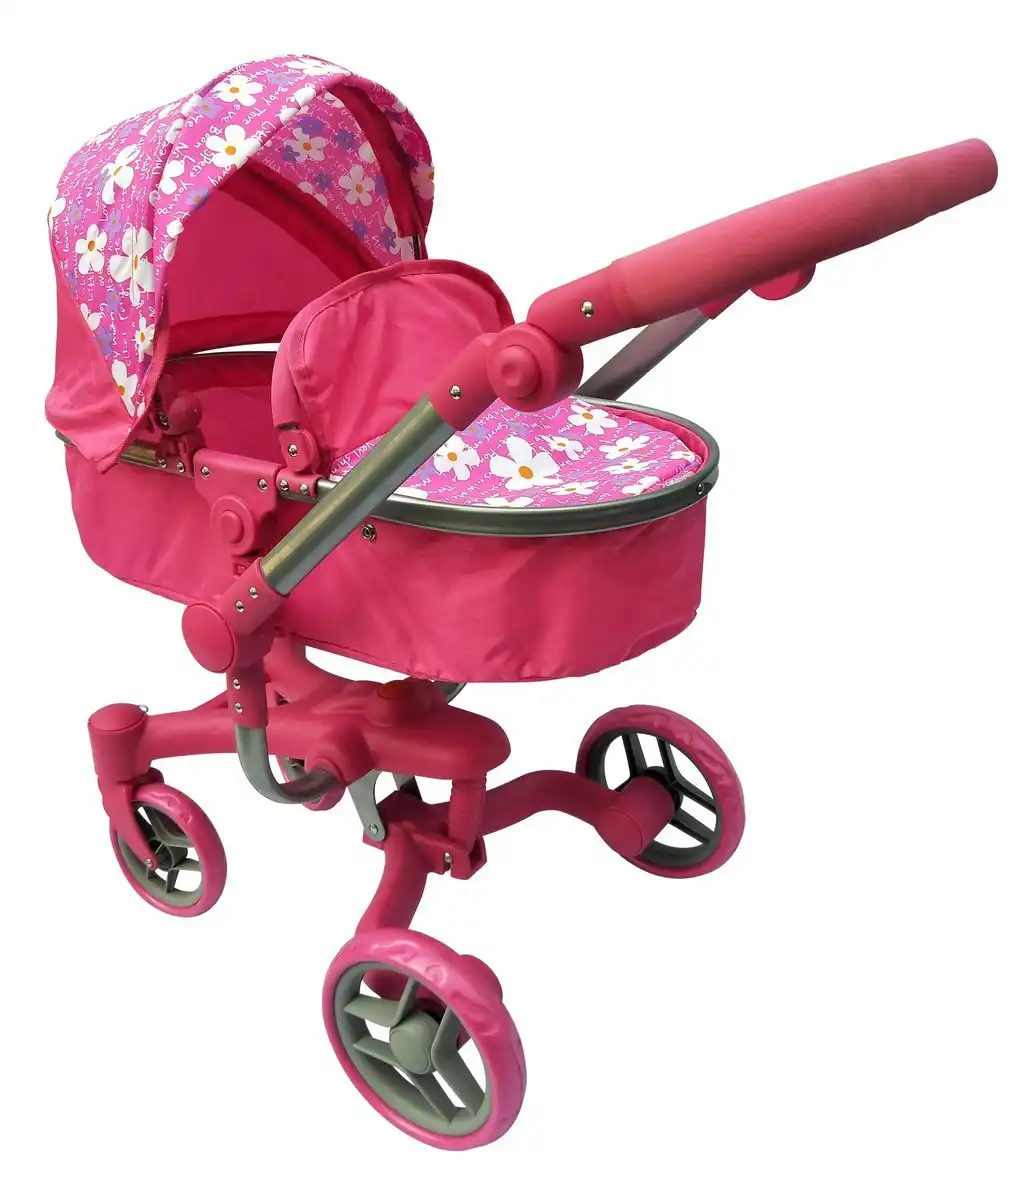 Playworld - Doll Deluxe 2 In 1 Toy Pram Pink